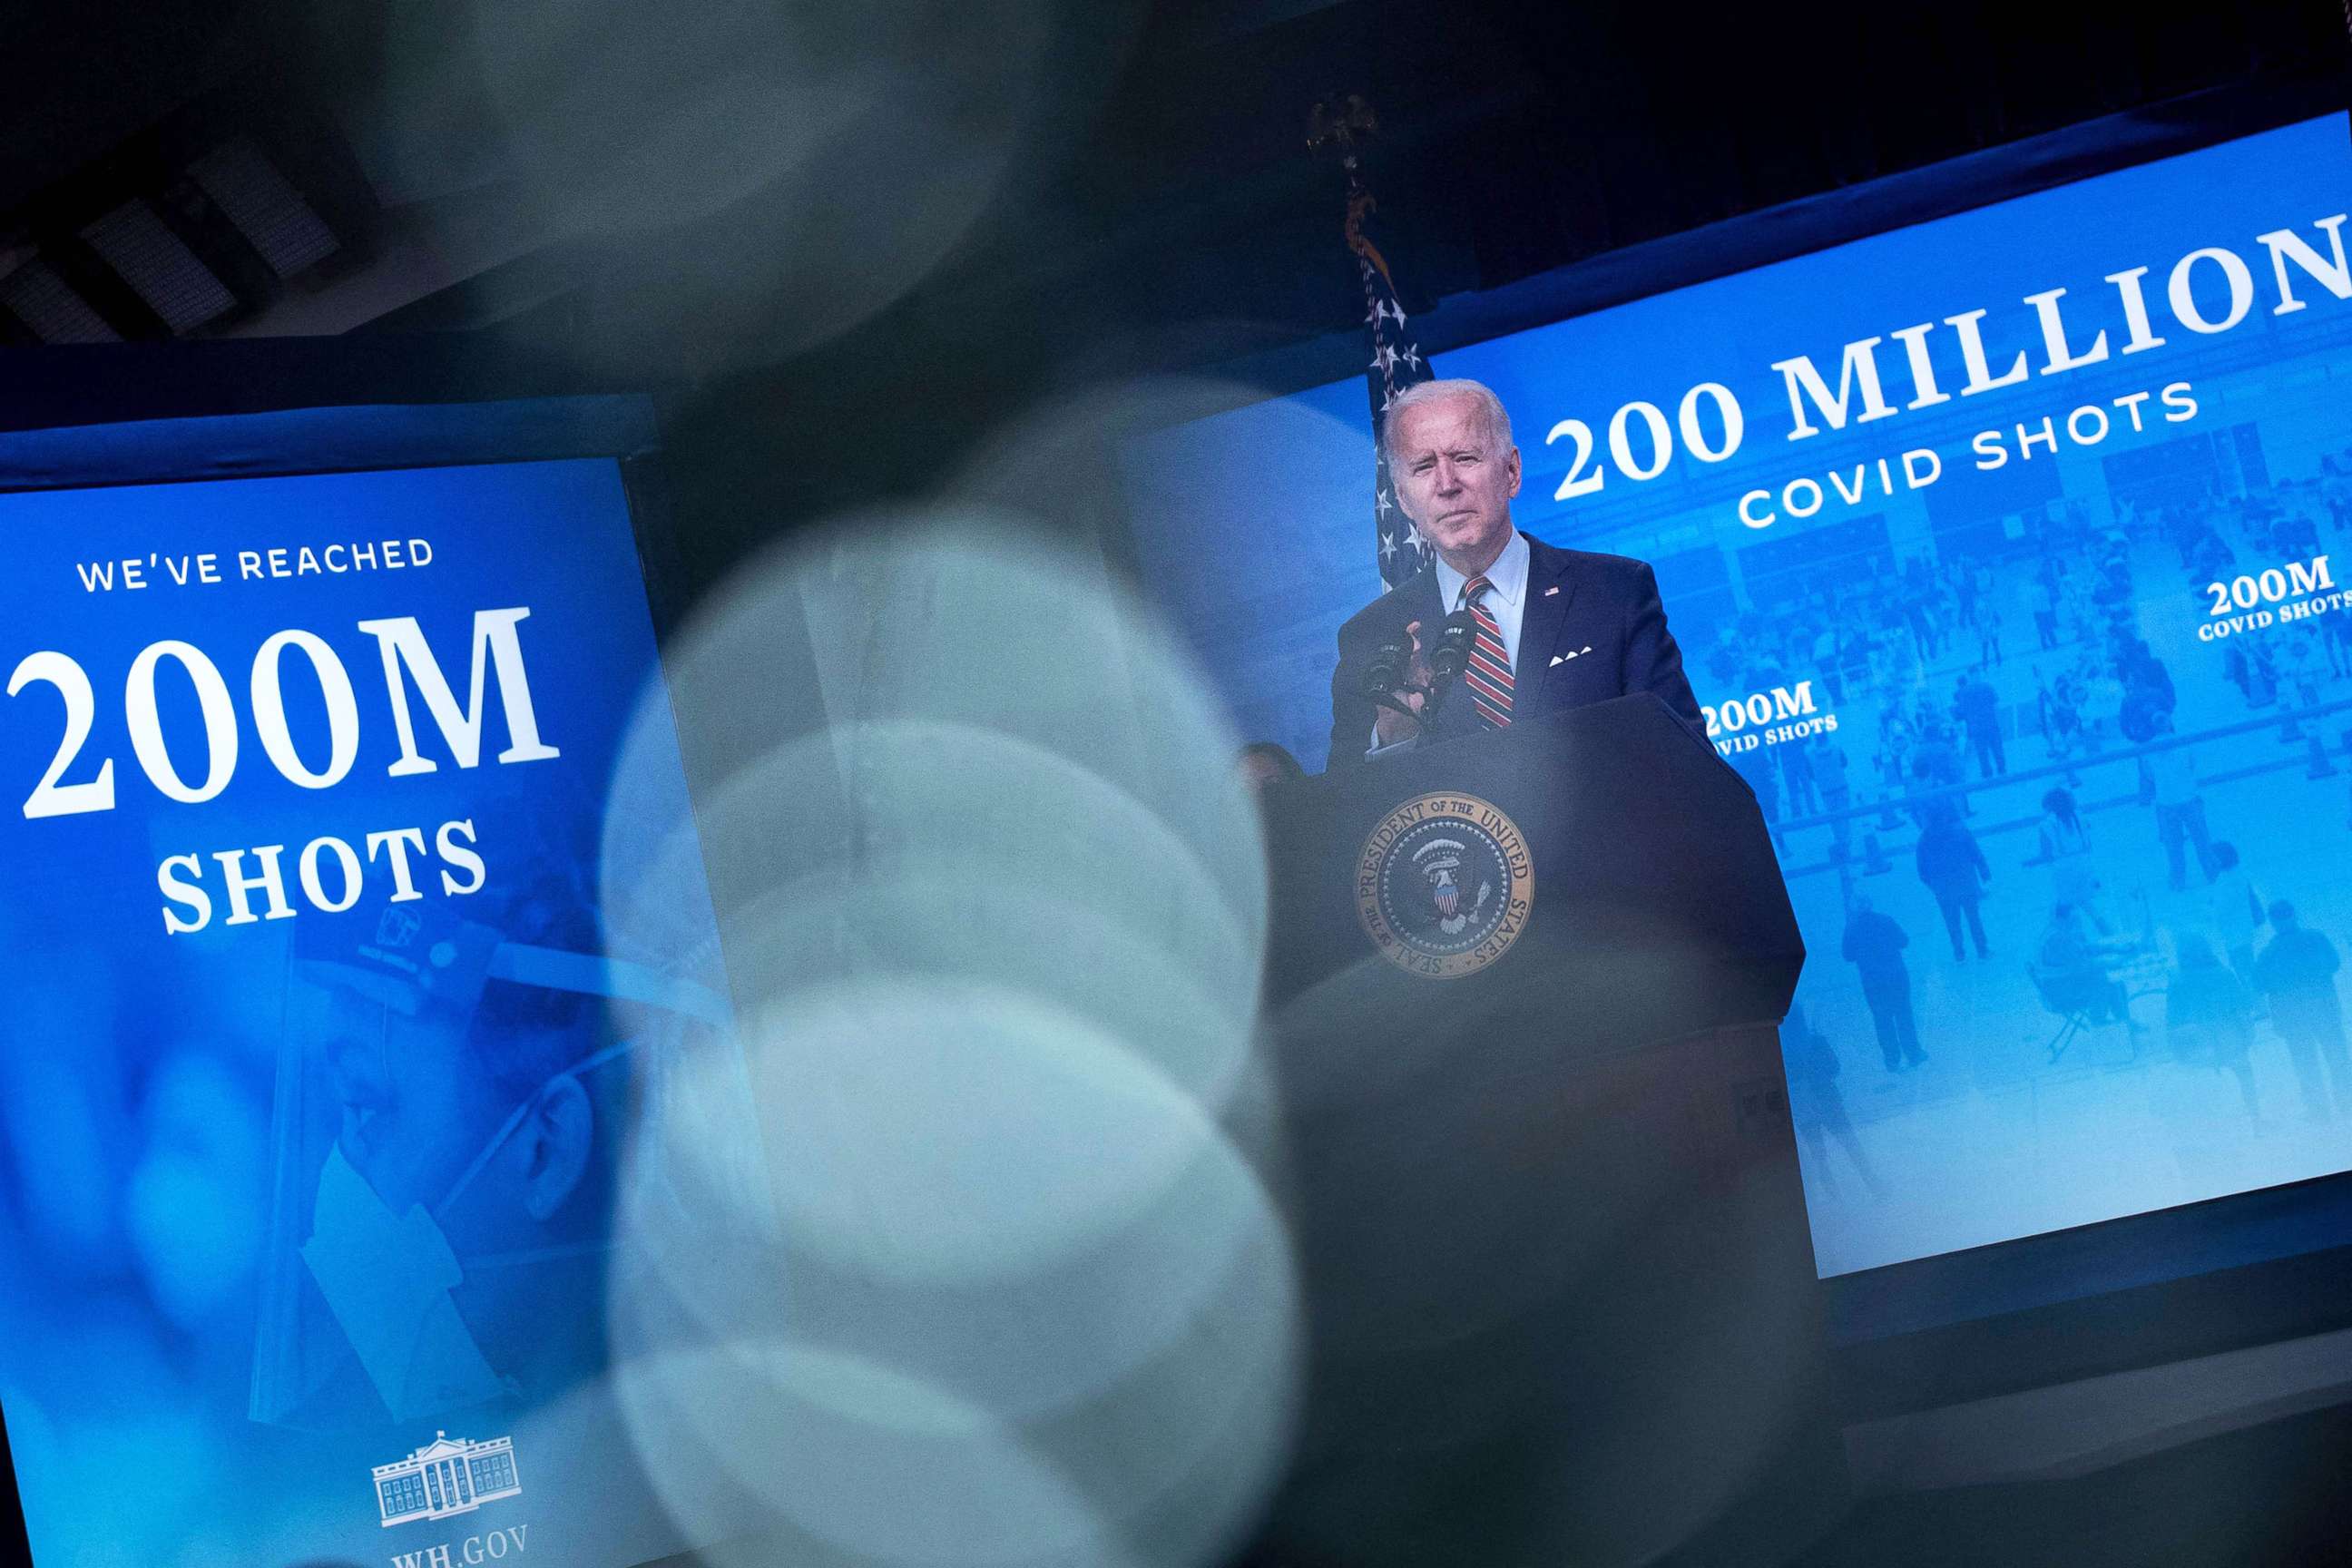 PHOTO: President Joe Biden delivers remarks on the Covid-19 response at the White House, April 21, 2021.